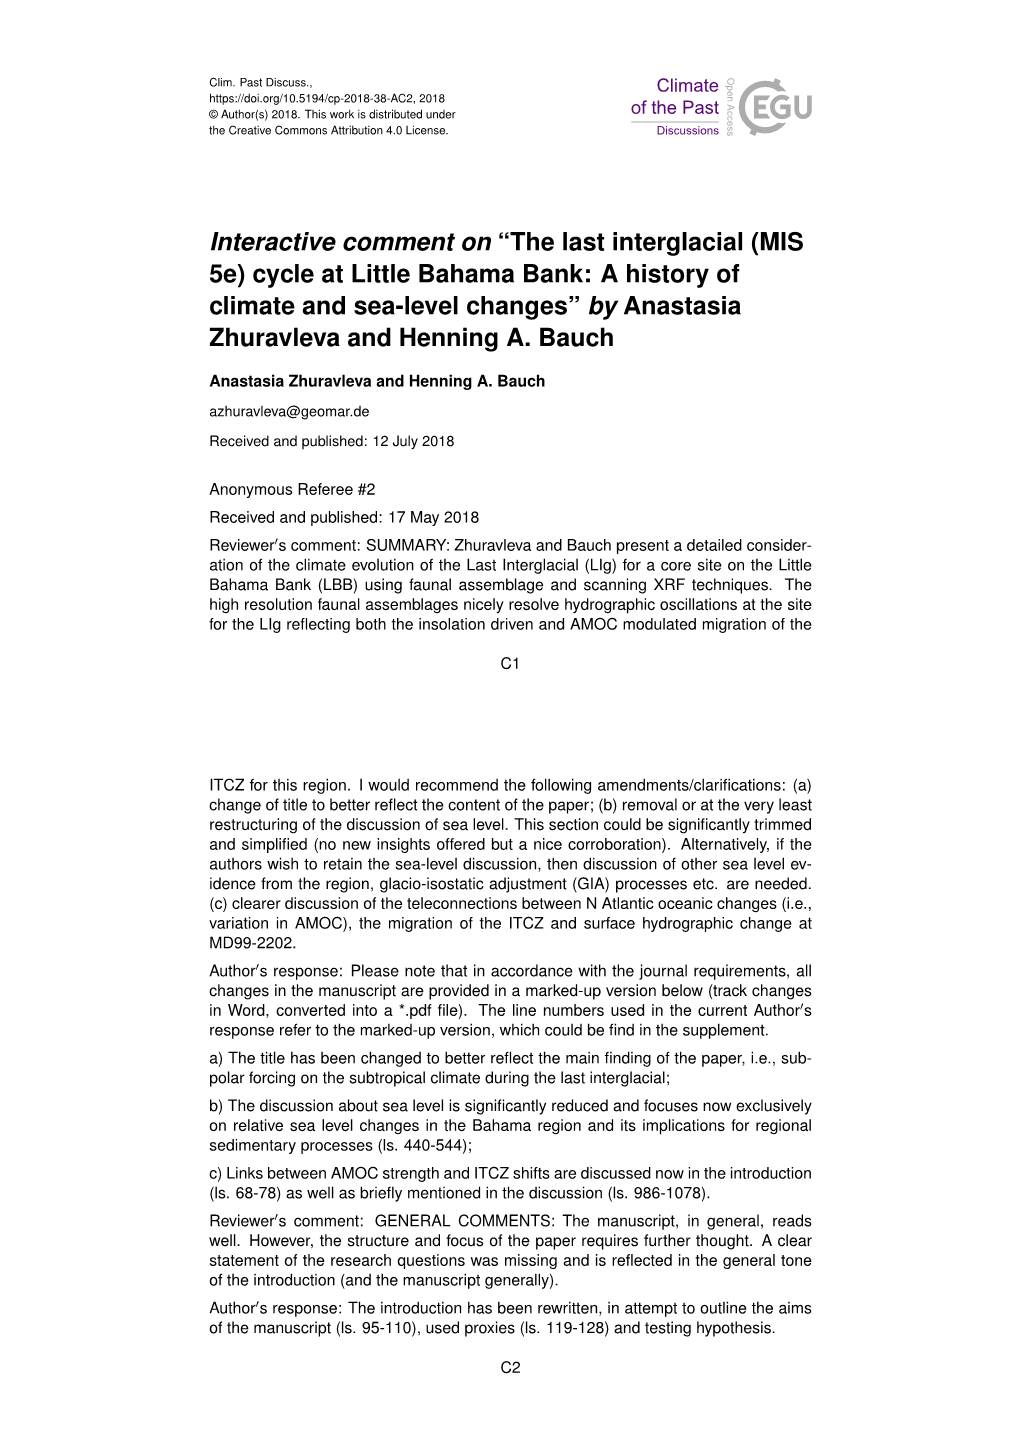 The Last Interglacial (MIS 5E) Cycle at Little Bahama Bank: a History of Climate and Sea-Level Changes” by Anastasia Zhuravleva and Henning A